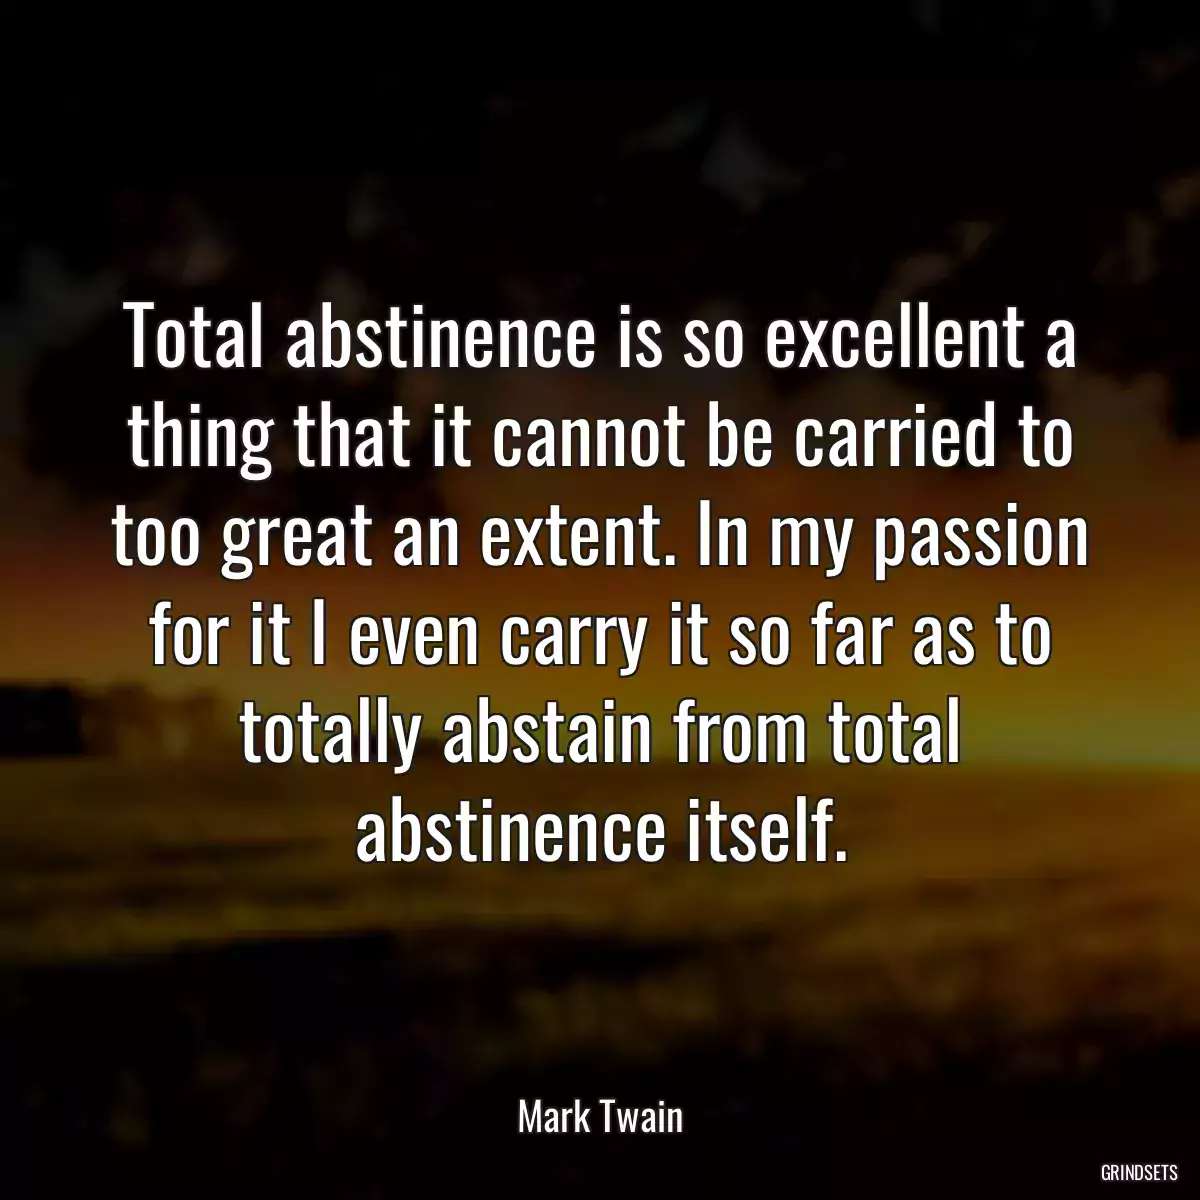 Total abstinence is so excellent a thing that it cannot be carried to too great an extent. In my passion for it I even carry it so far as to totally abstain from total abstinence itself.